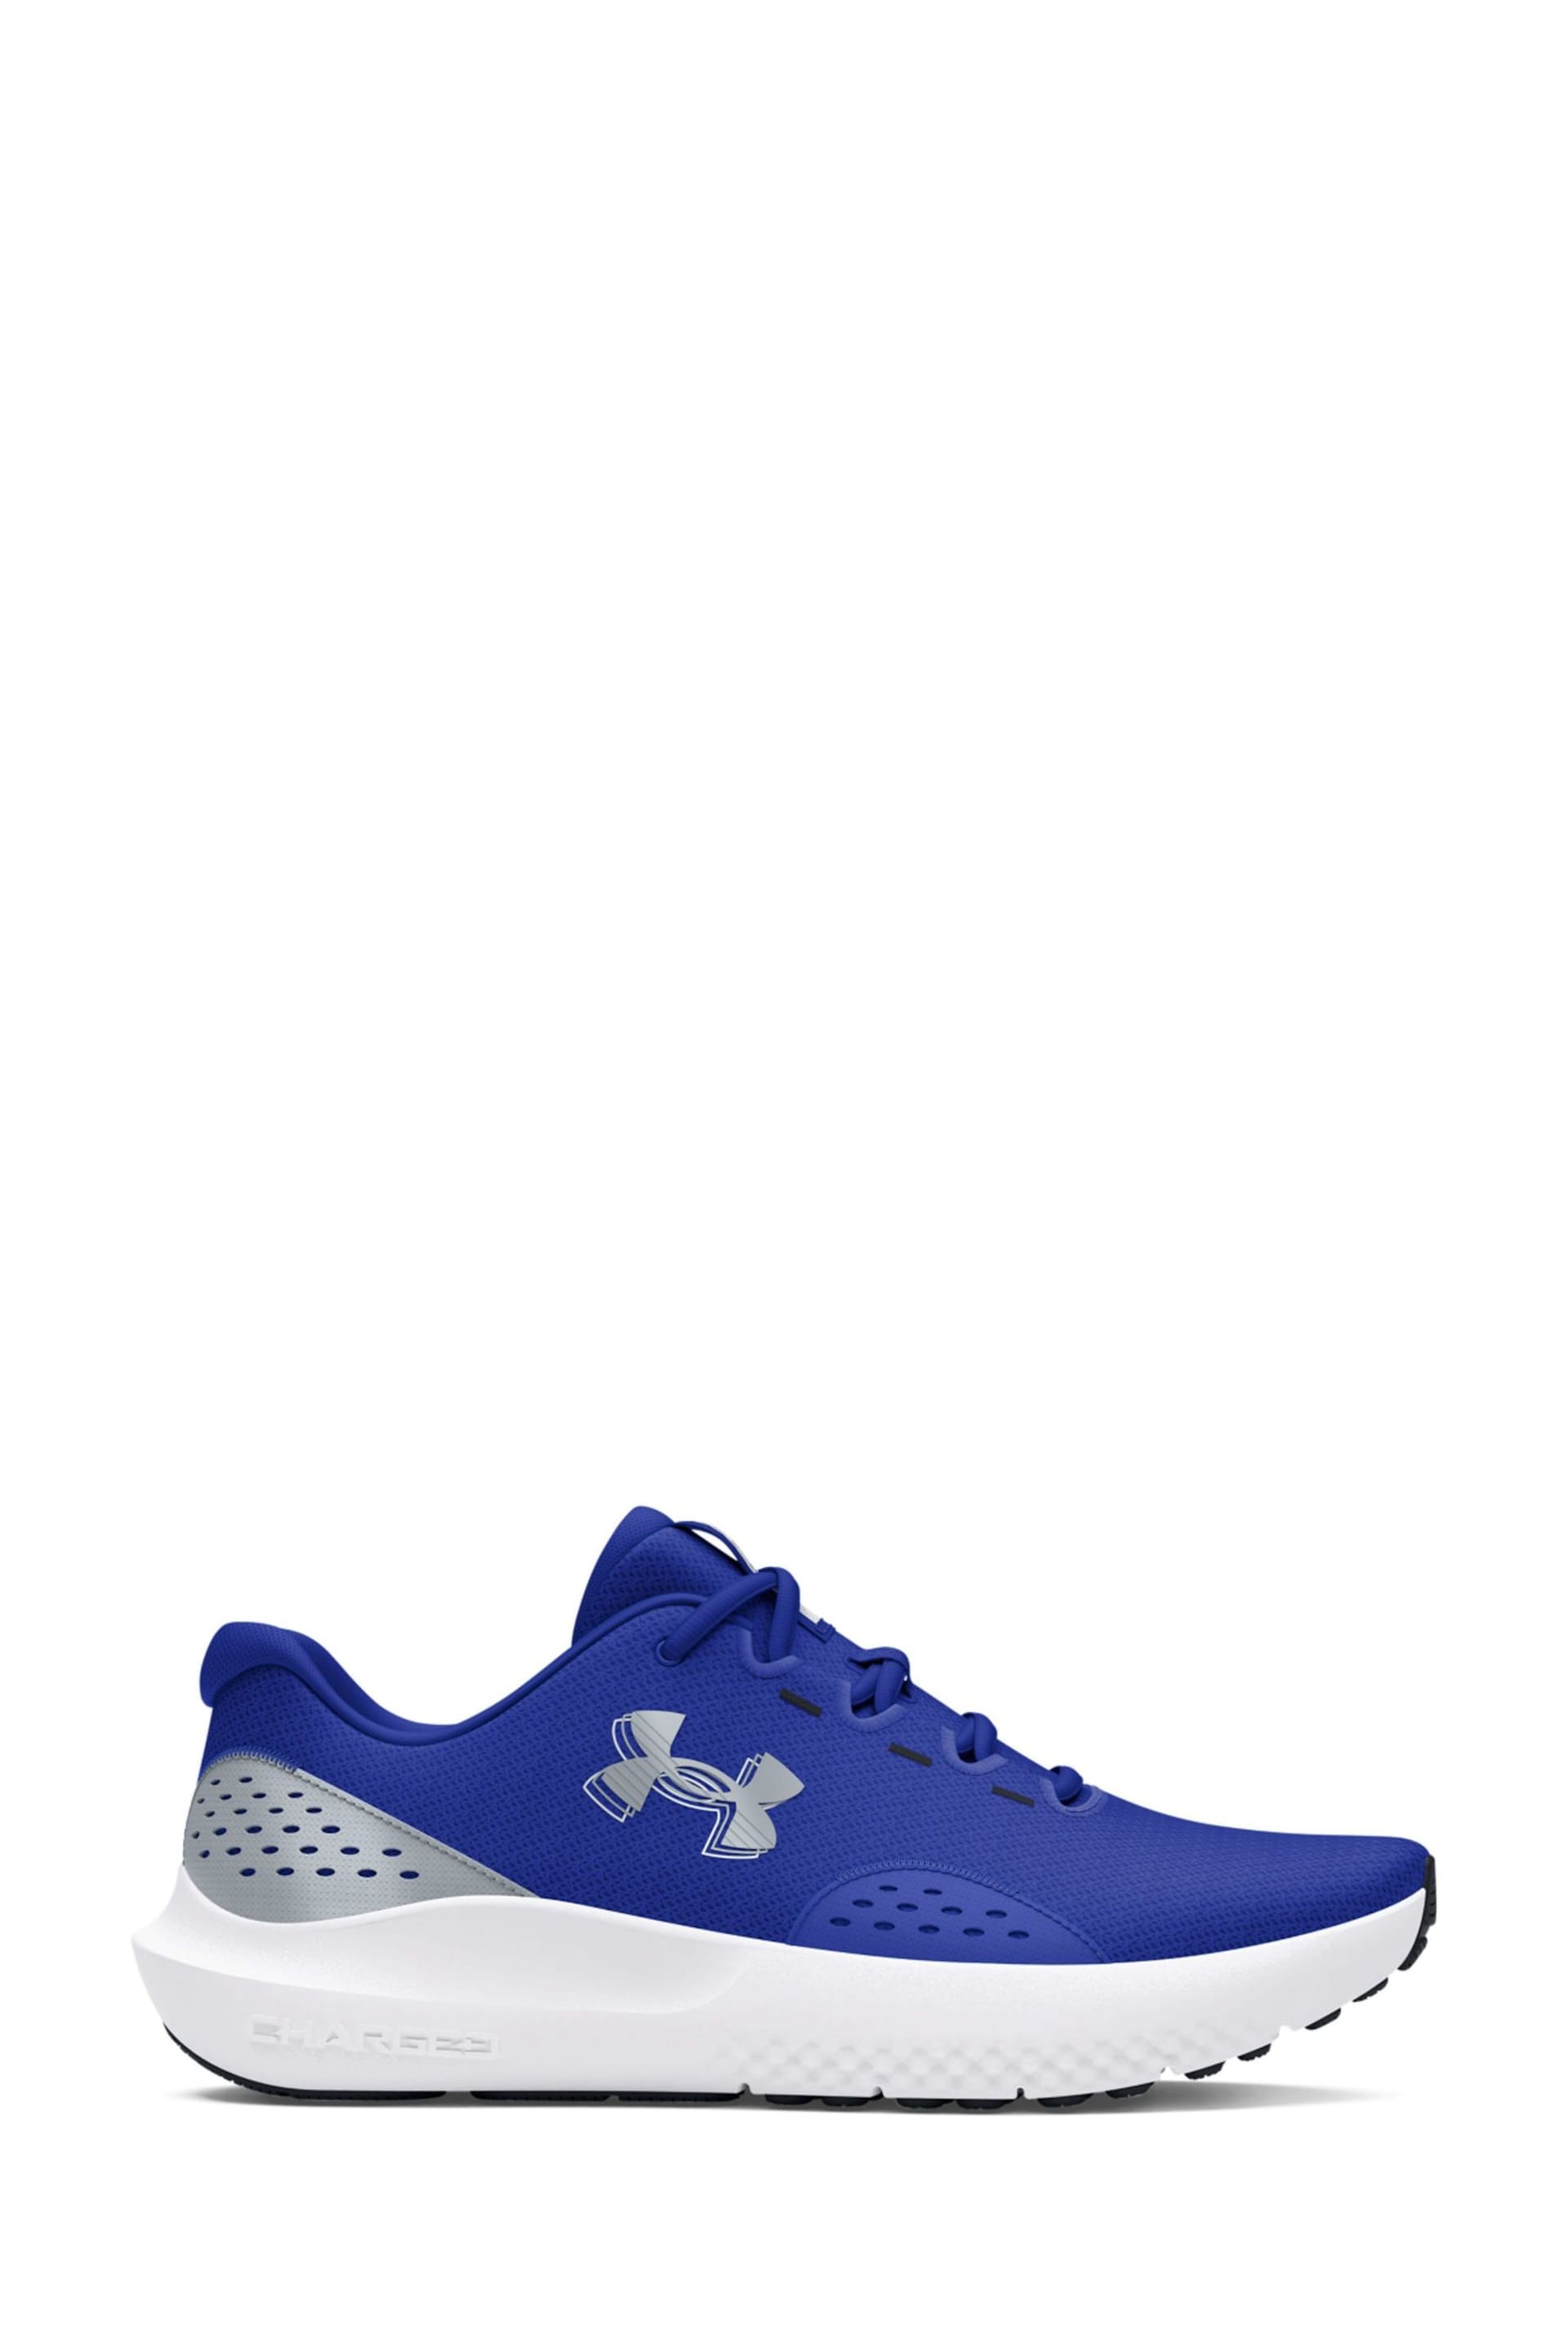 Under Armour Blue Surge 4 Trainers - Image 1 of 5